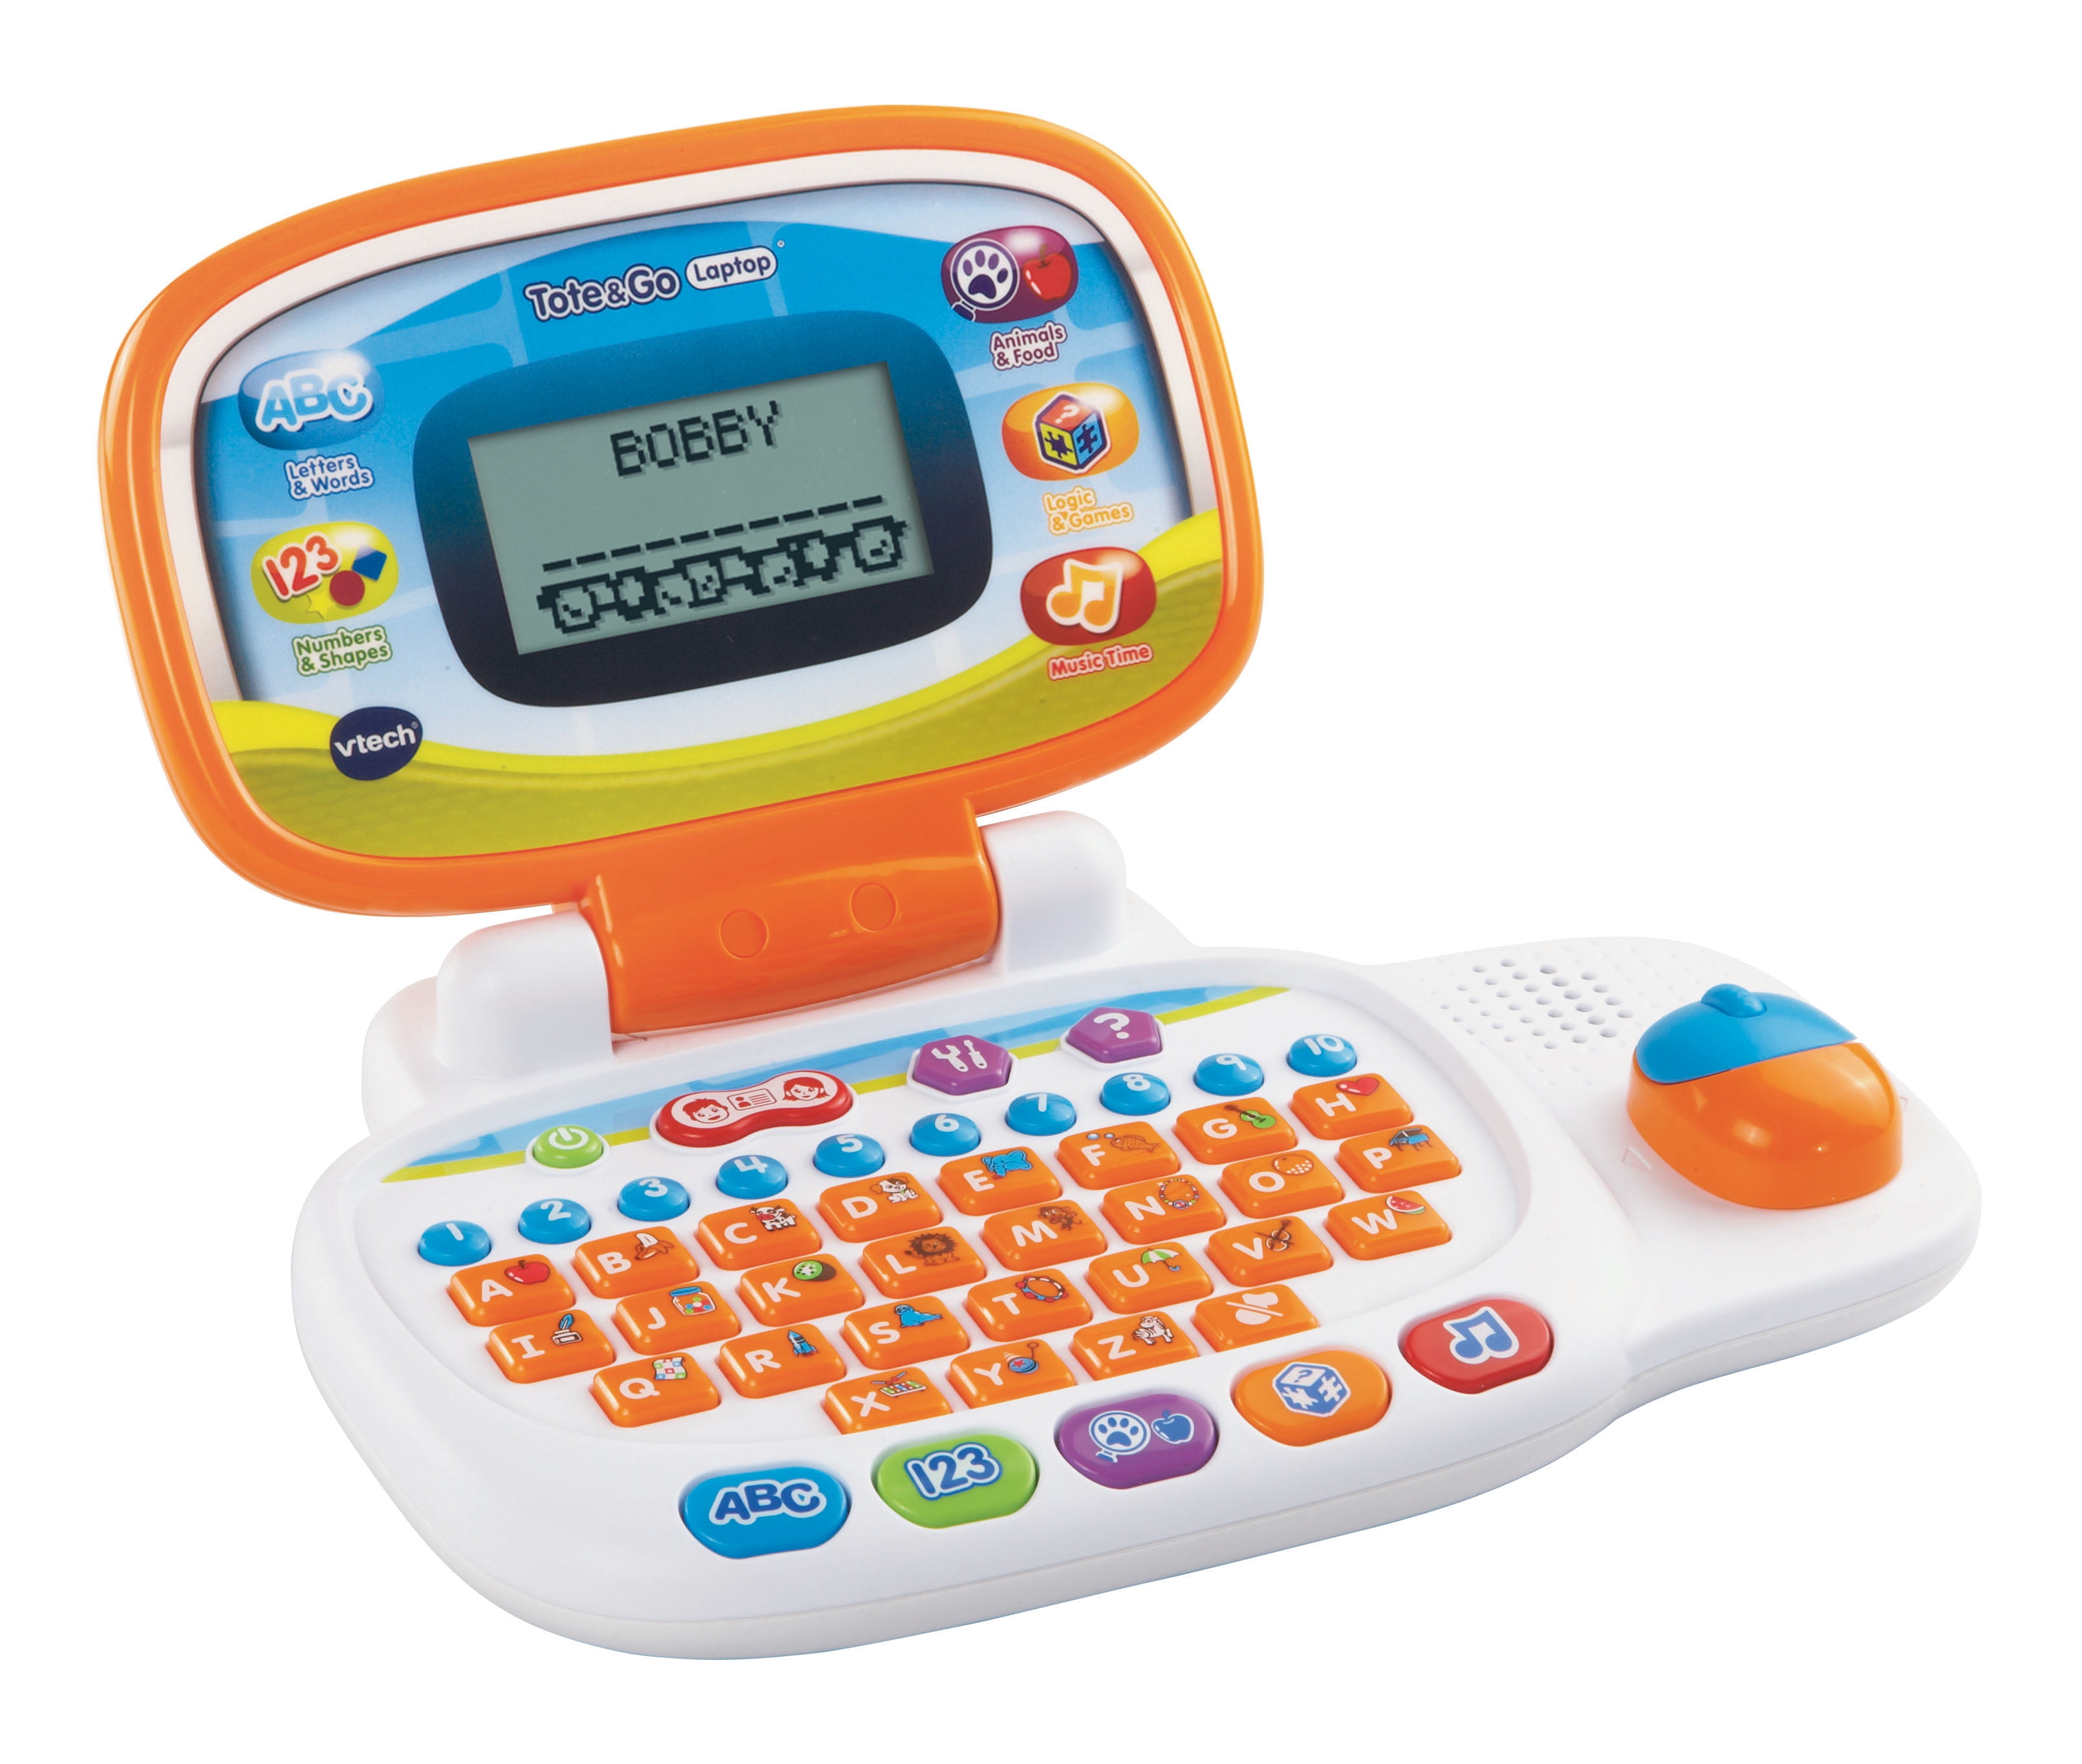 VTech, Touch and Teach Elephant, ABC Toy for Toddlers - Walmart.com